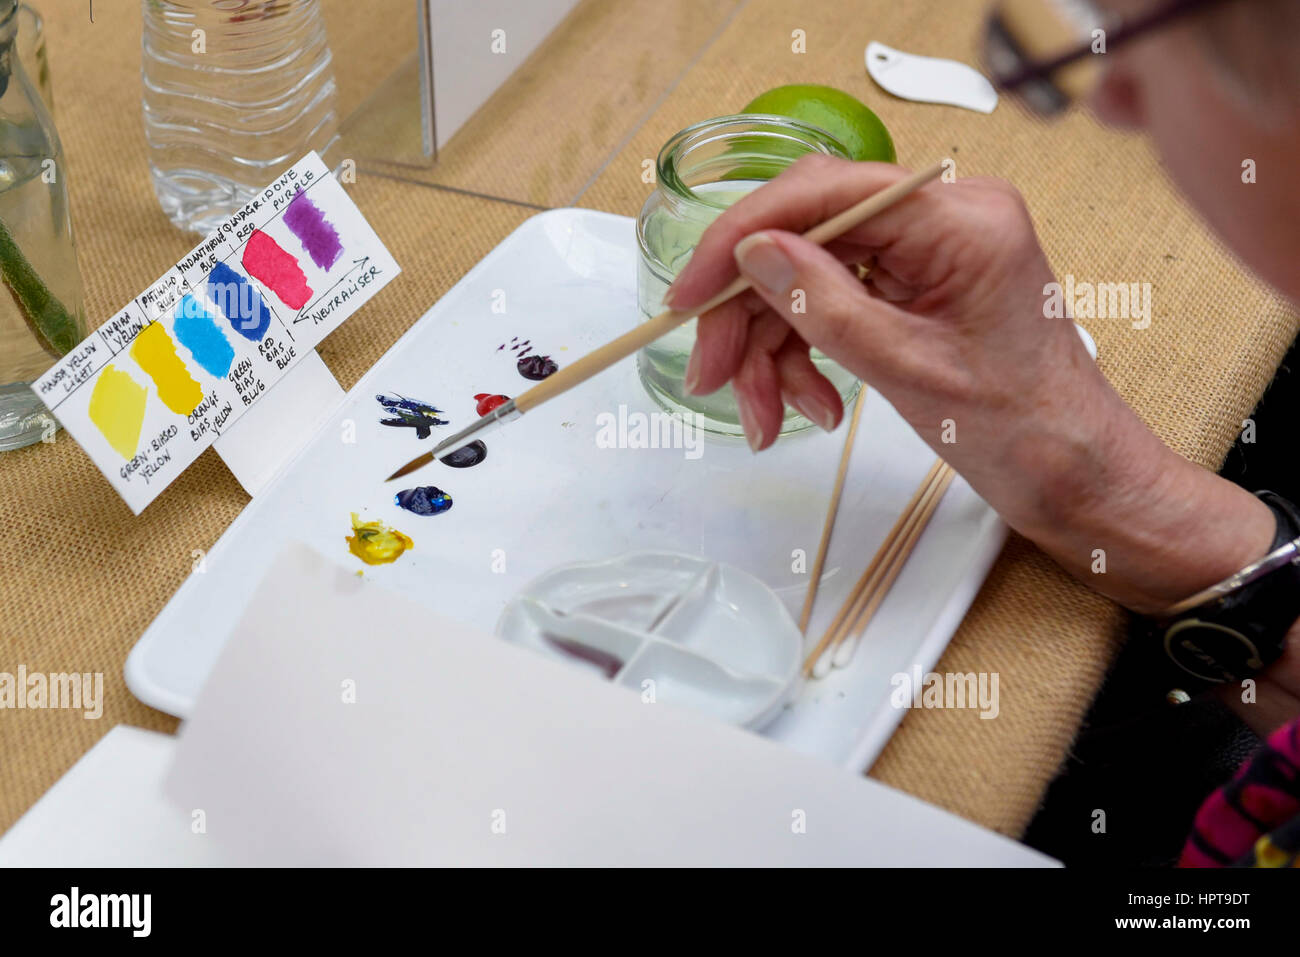 London, UK. 24th Feb, 2017. An visitor joins a painting demonstration as members of the public view the work of some of the world's best botanical artists through a display of previously unseen work at the RHS London Botanical Art Show. Taking place this weekend, the show features artists from the UK and internationally including USA, Italy, Japan, New Zealand and South Korea. Credit: Stephen Chung/Alamy Live News Stock Photo